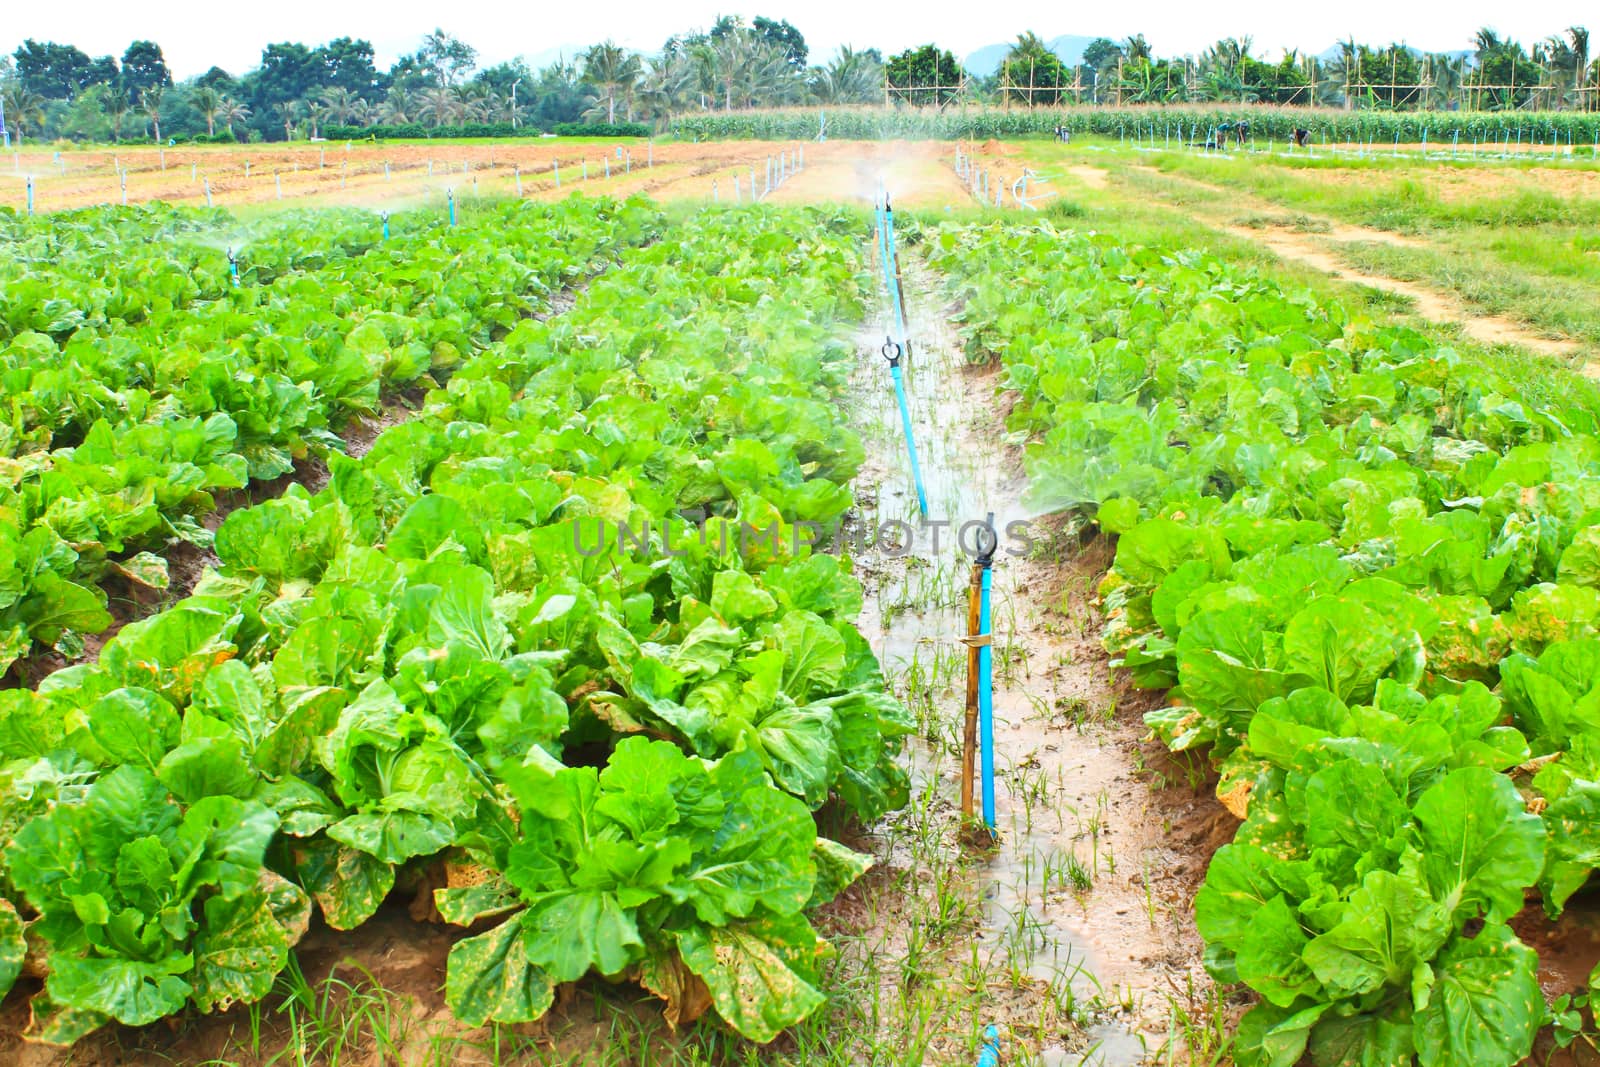 Field of Green Leaf and lettuce crops growing in rows on a farm ,Thailand